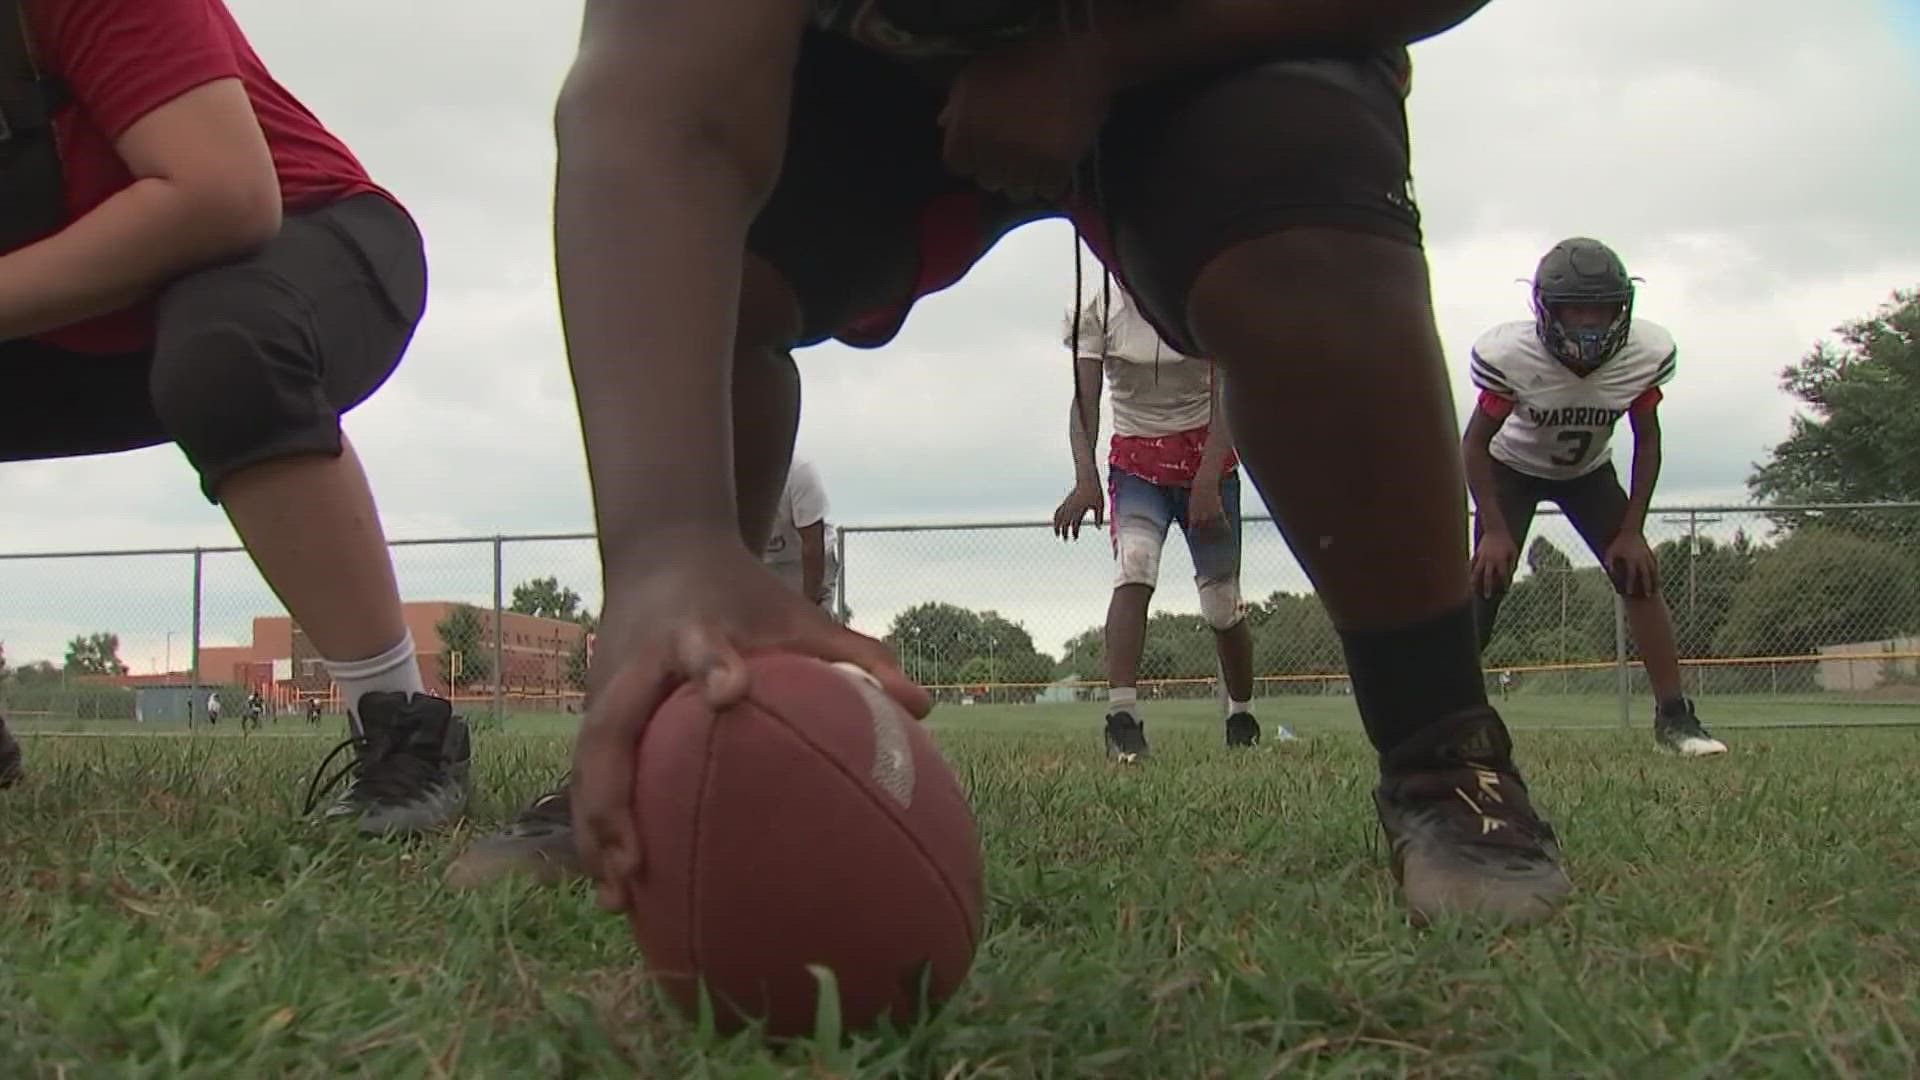 Columbus Dream has helped steer three boys involved in the “Kia Boys” away from violence and car theft to the football field.